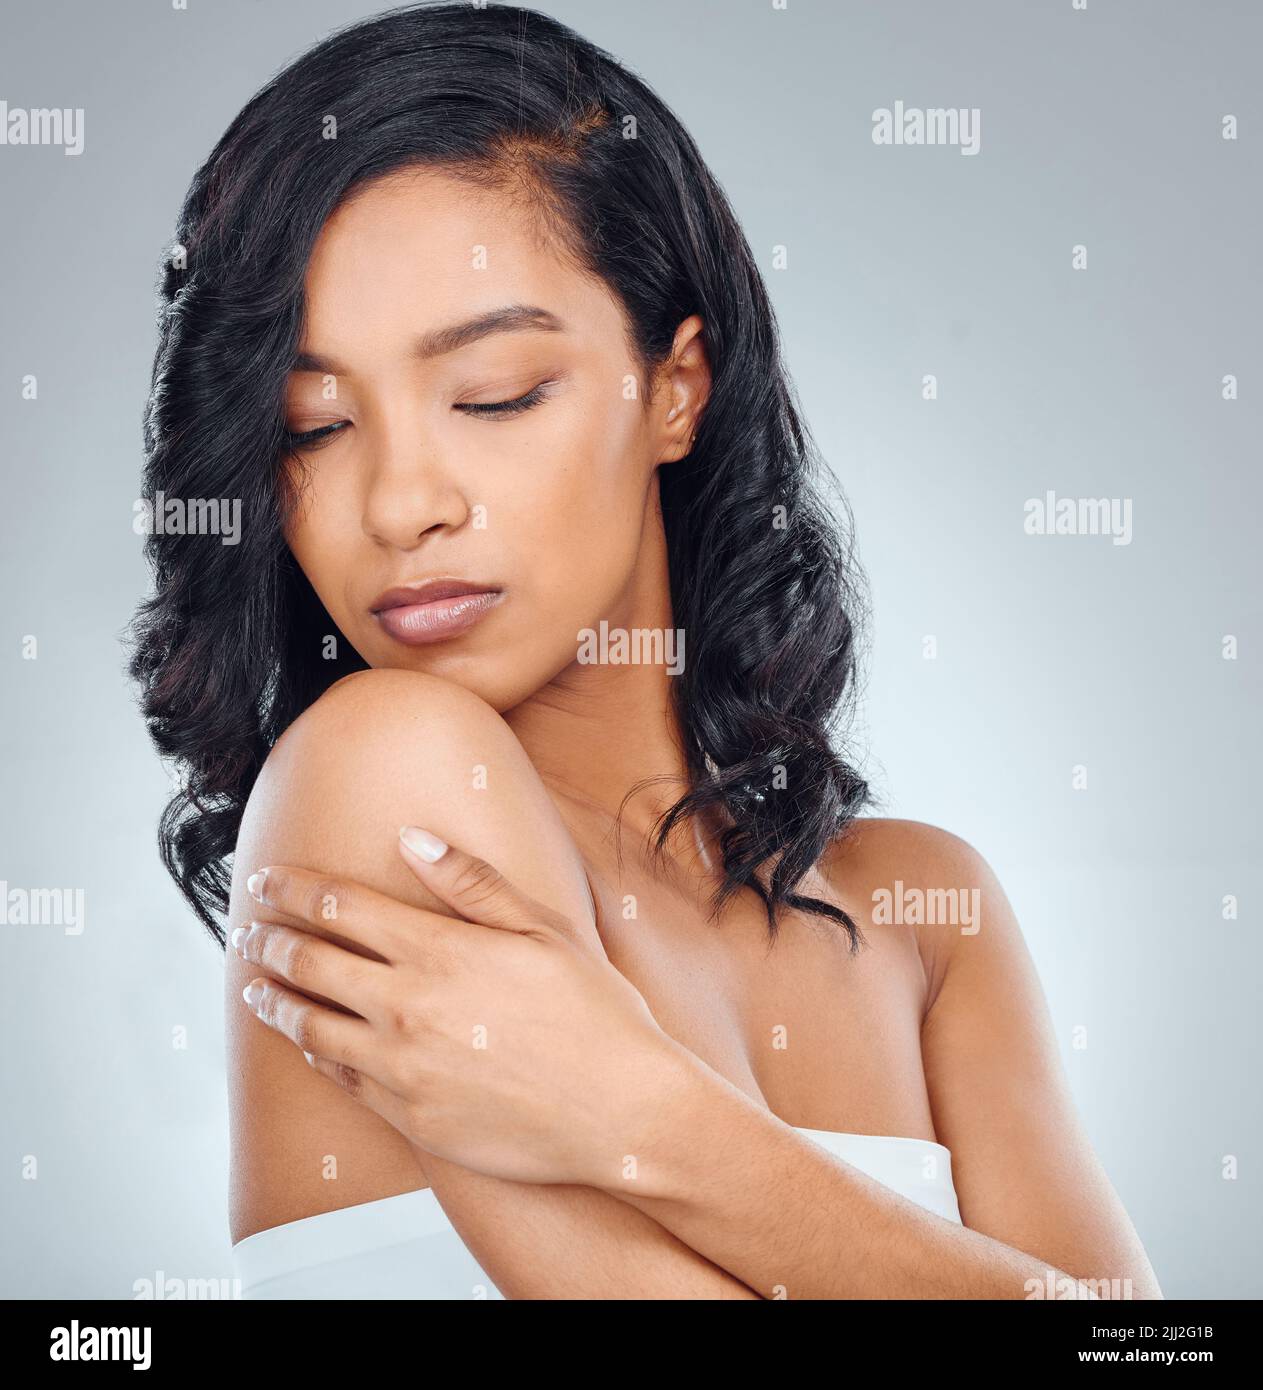 Moisturise your hair and body regularly. Studio shot of an attractive young woman posing against a grey background. Stock Photo